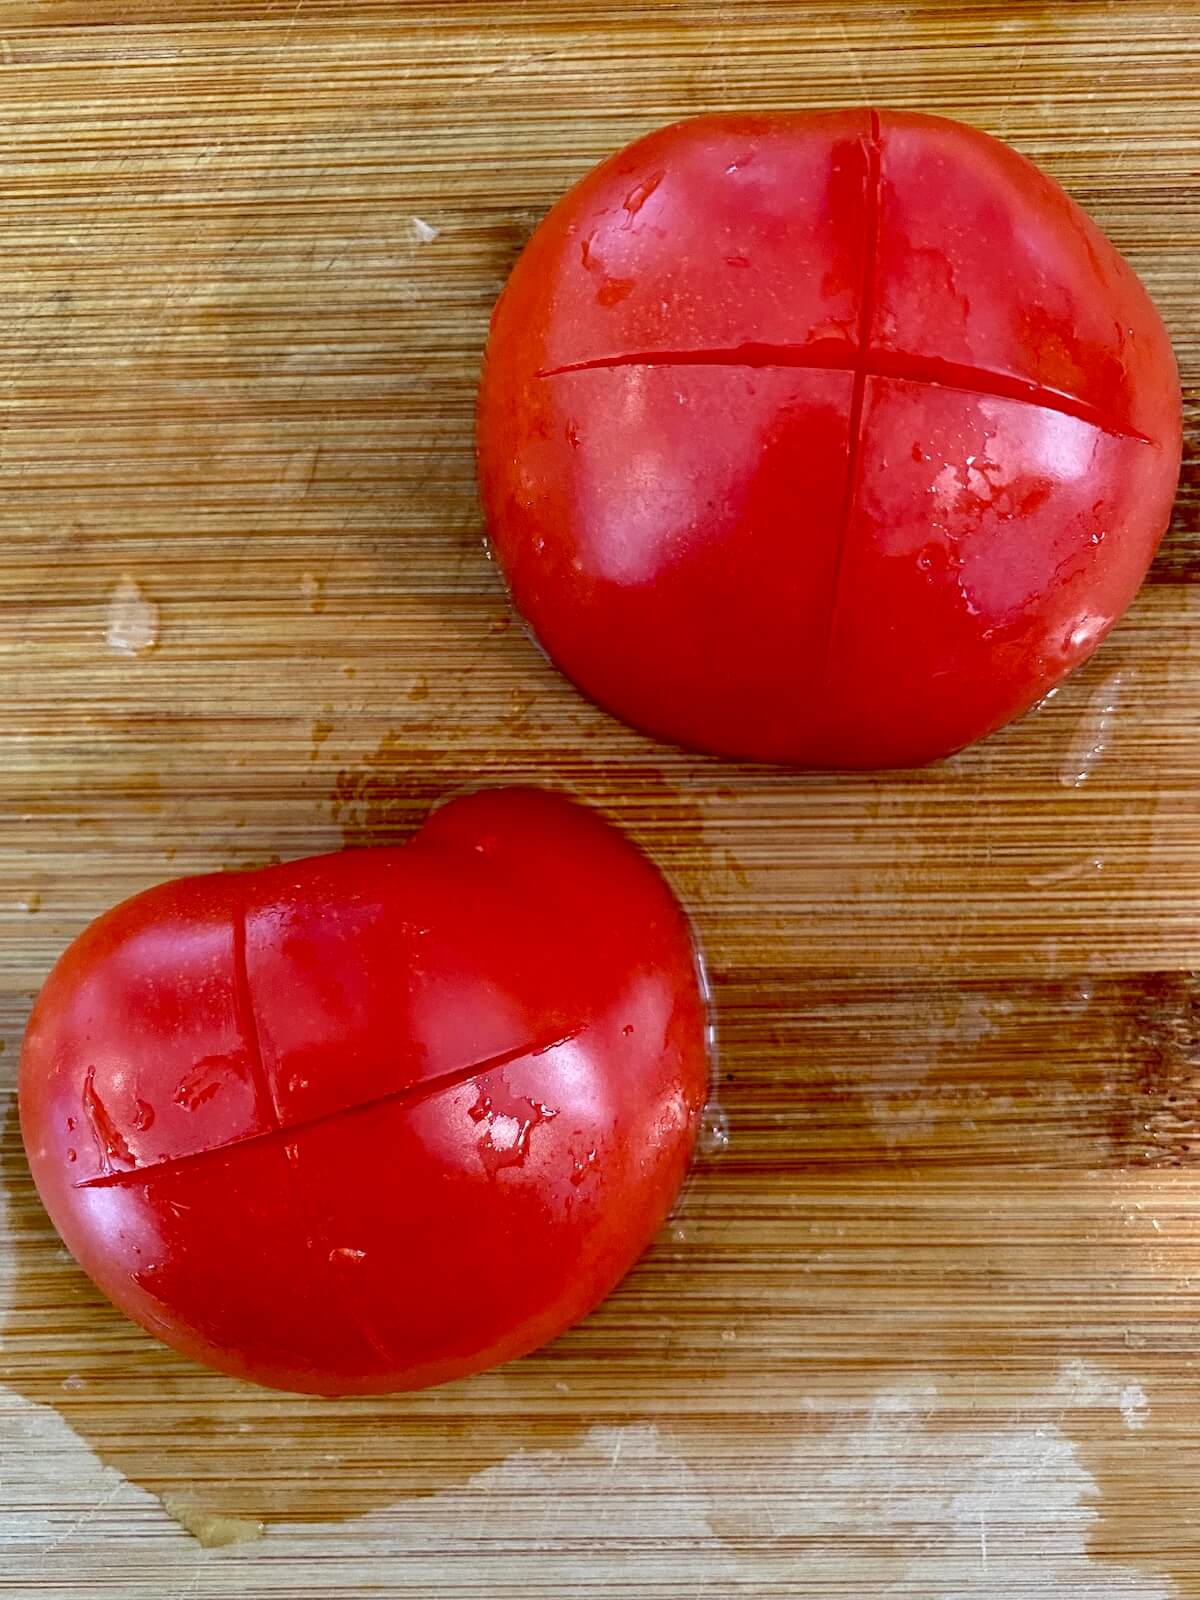 A tomato cut-side-down on a bamboo cutting board. The back of each tomato is scored with an X.